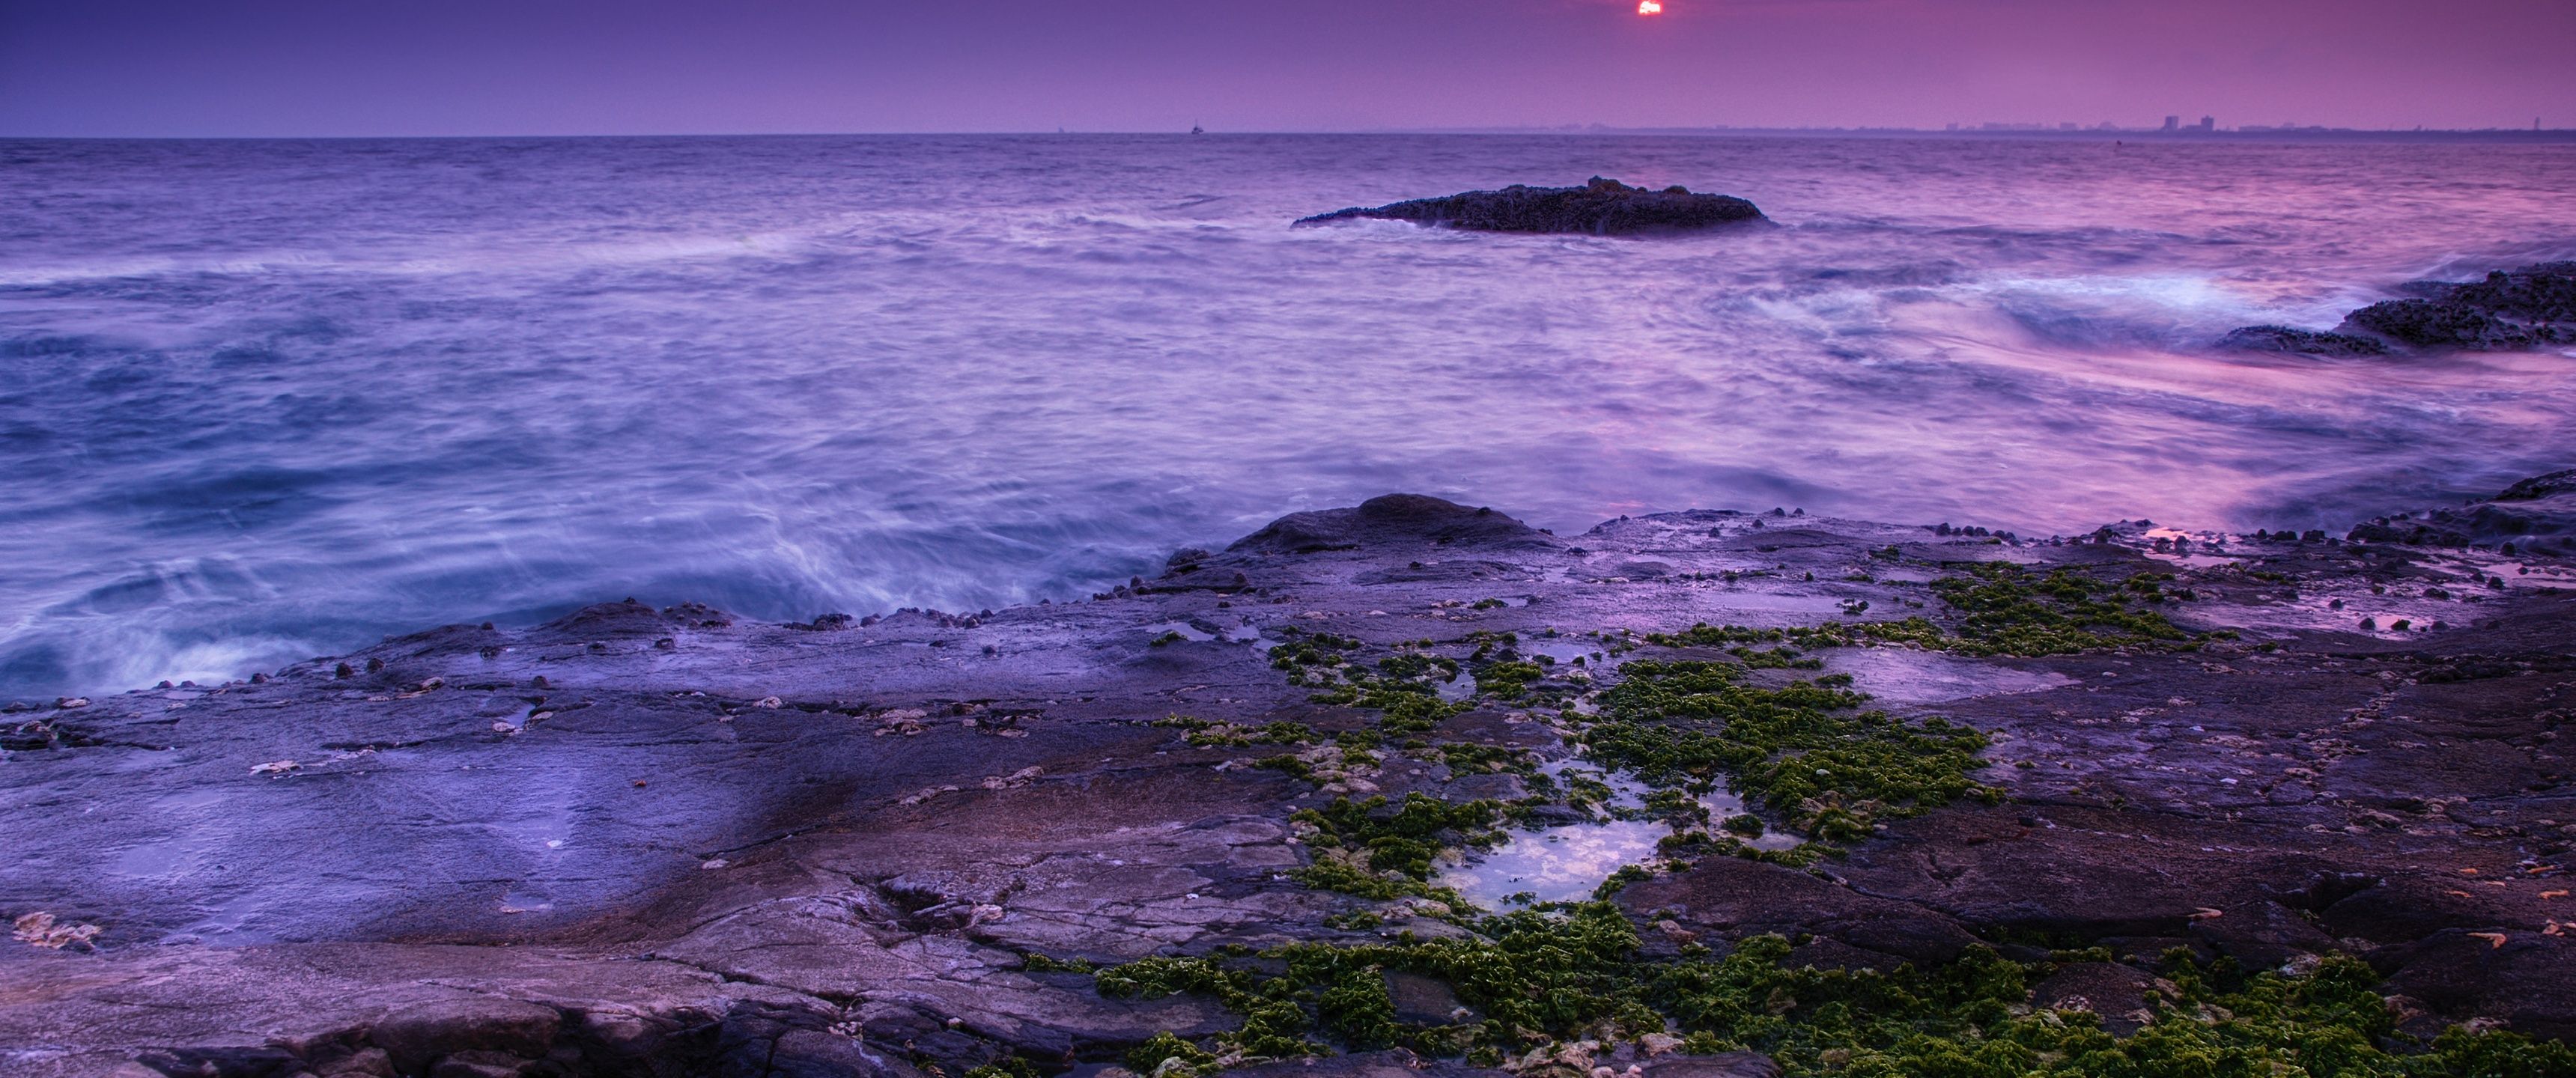 A rocky shore with water and the sun setting - Coast, ocean